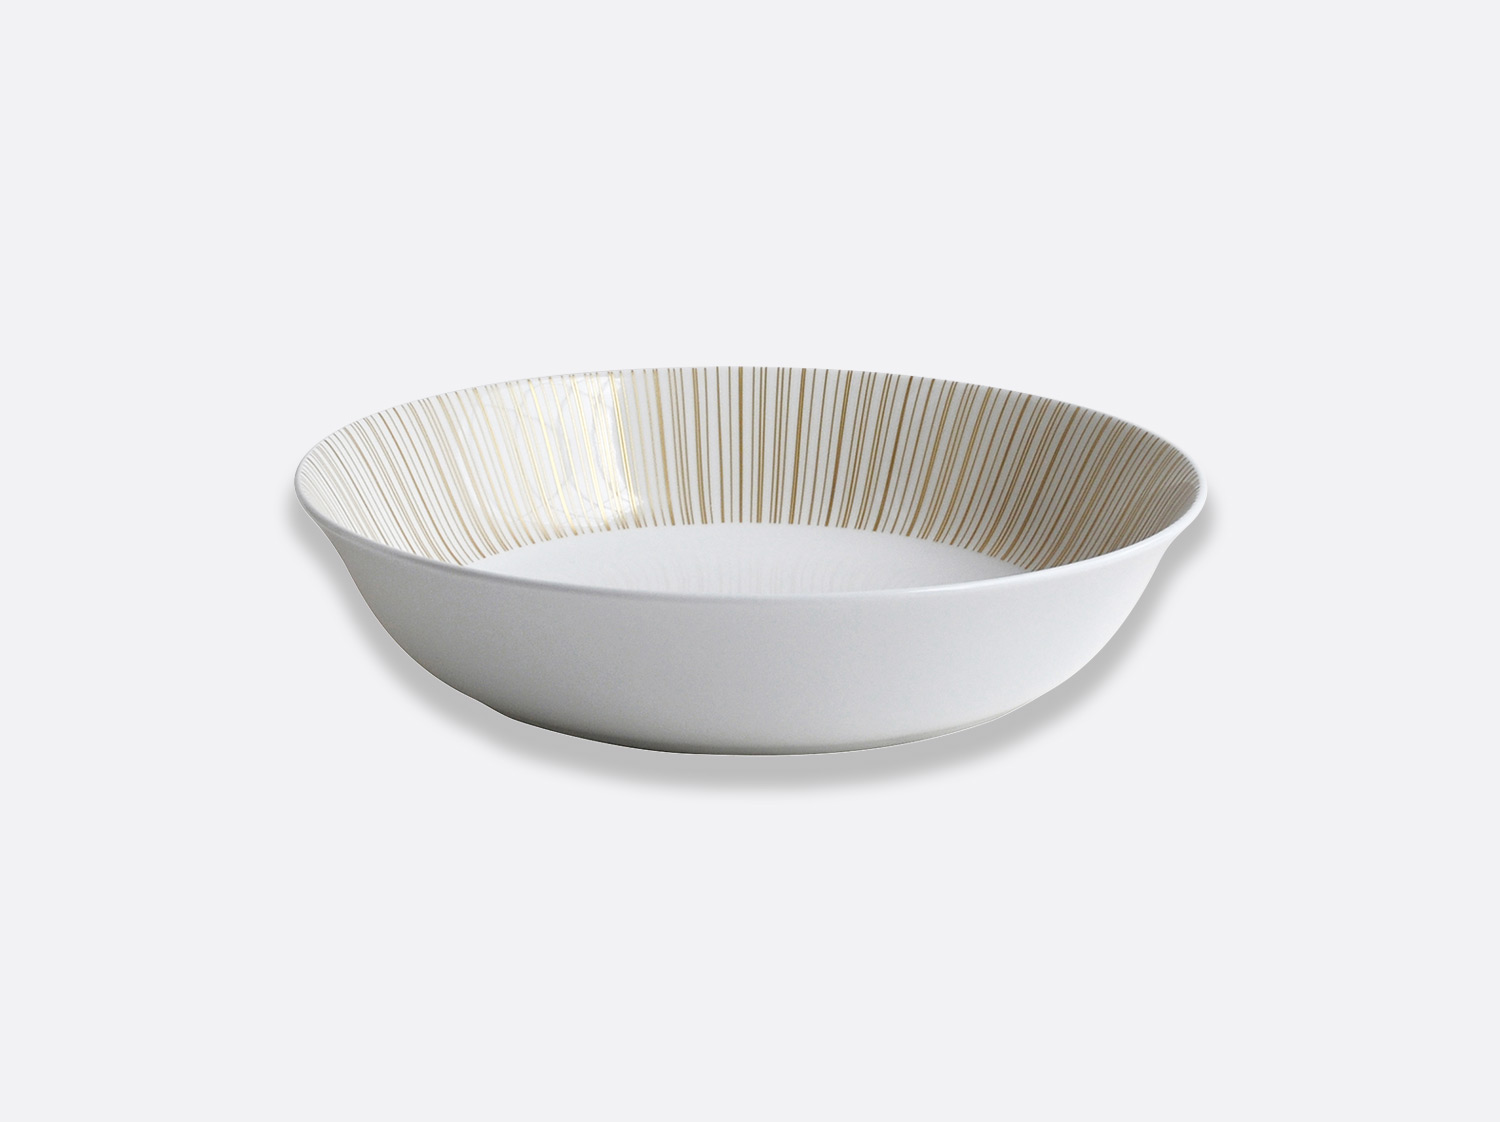 China Open vegetable bowl 9.5" of the collection Sol | Bernardaud